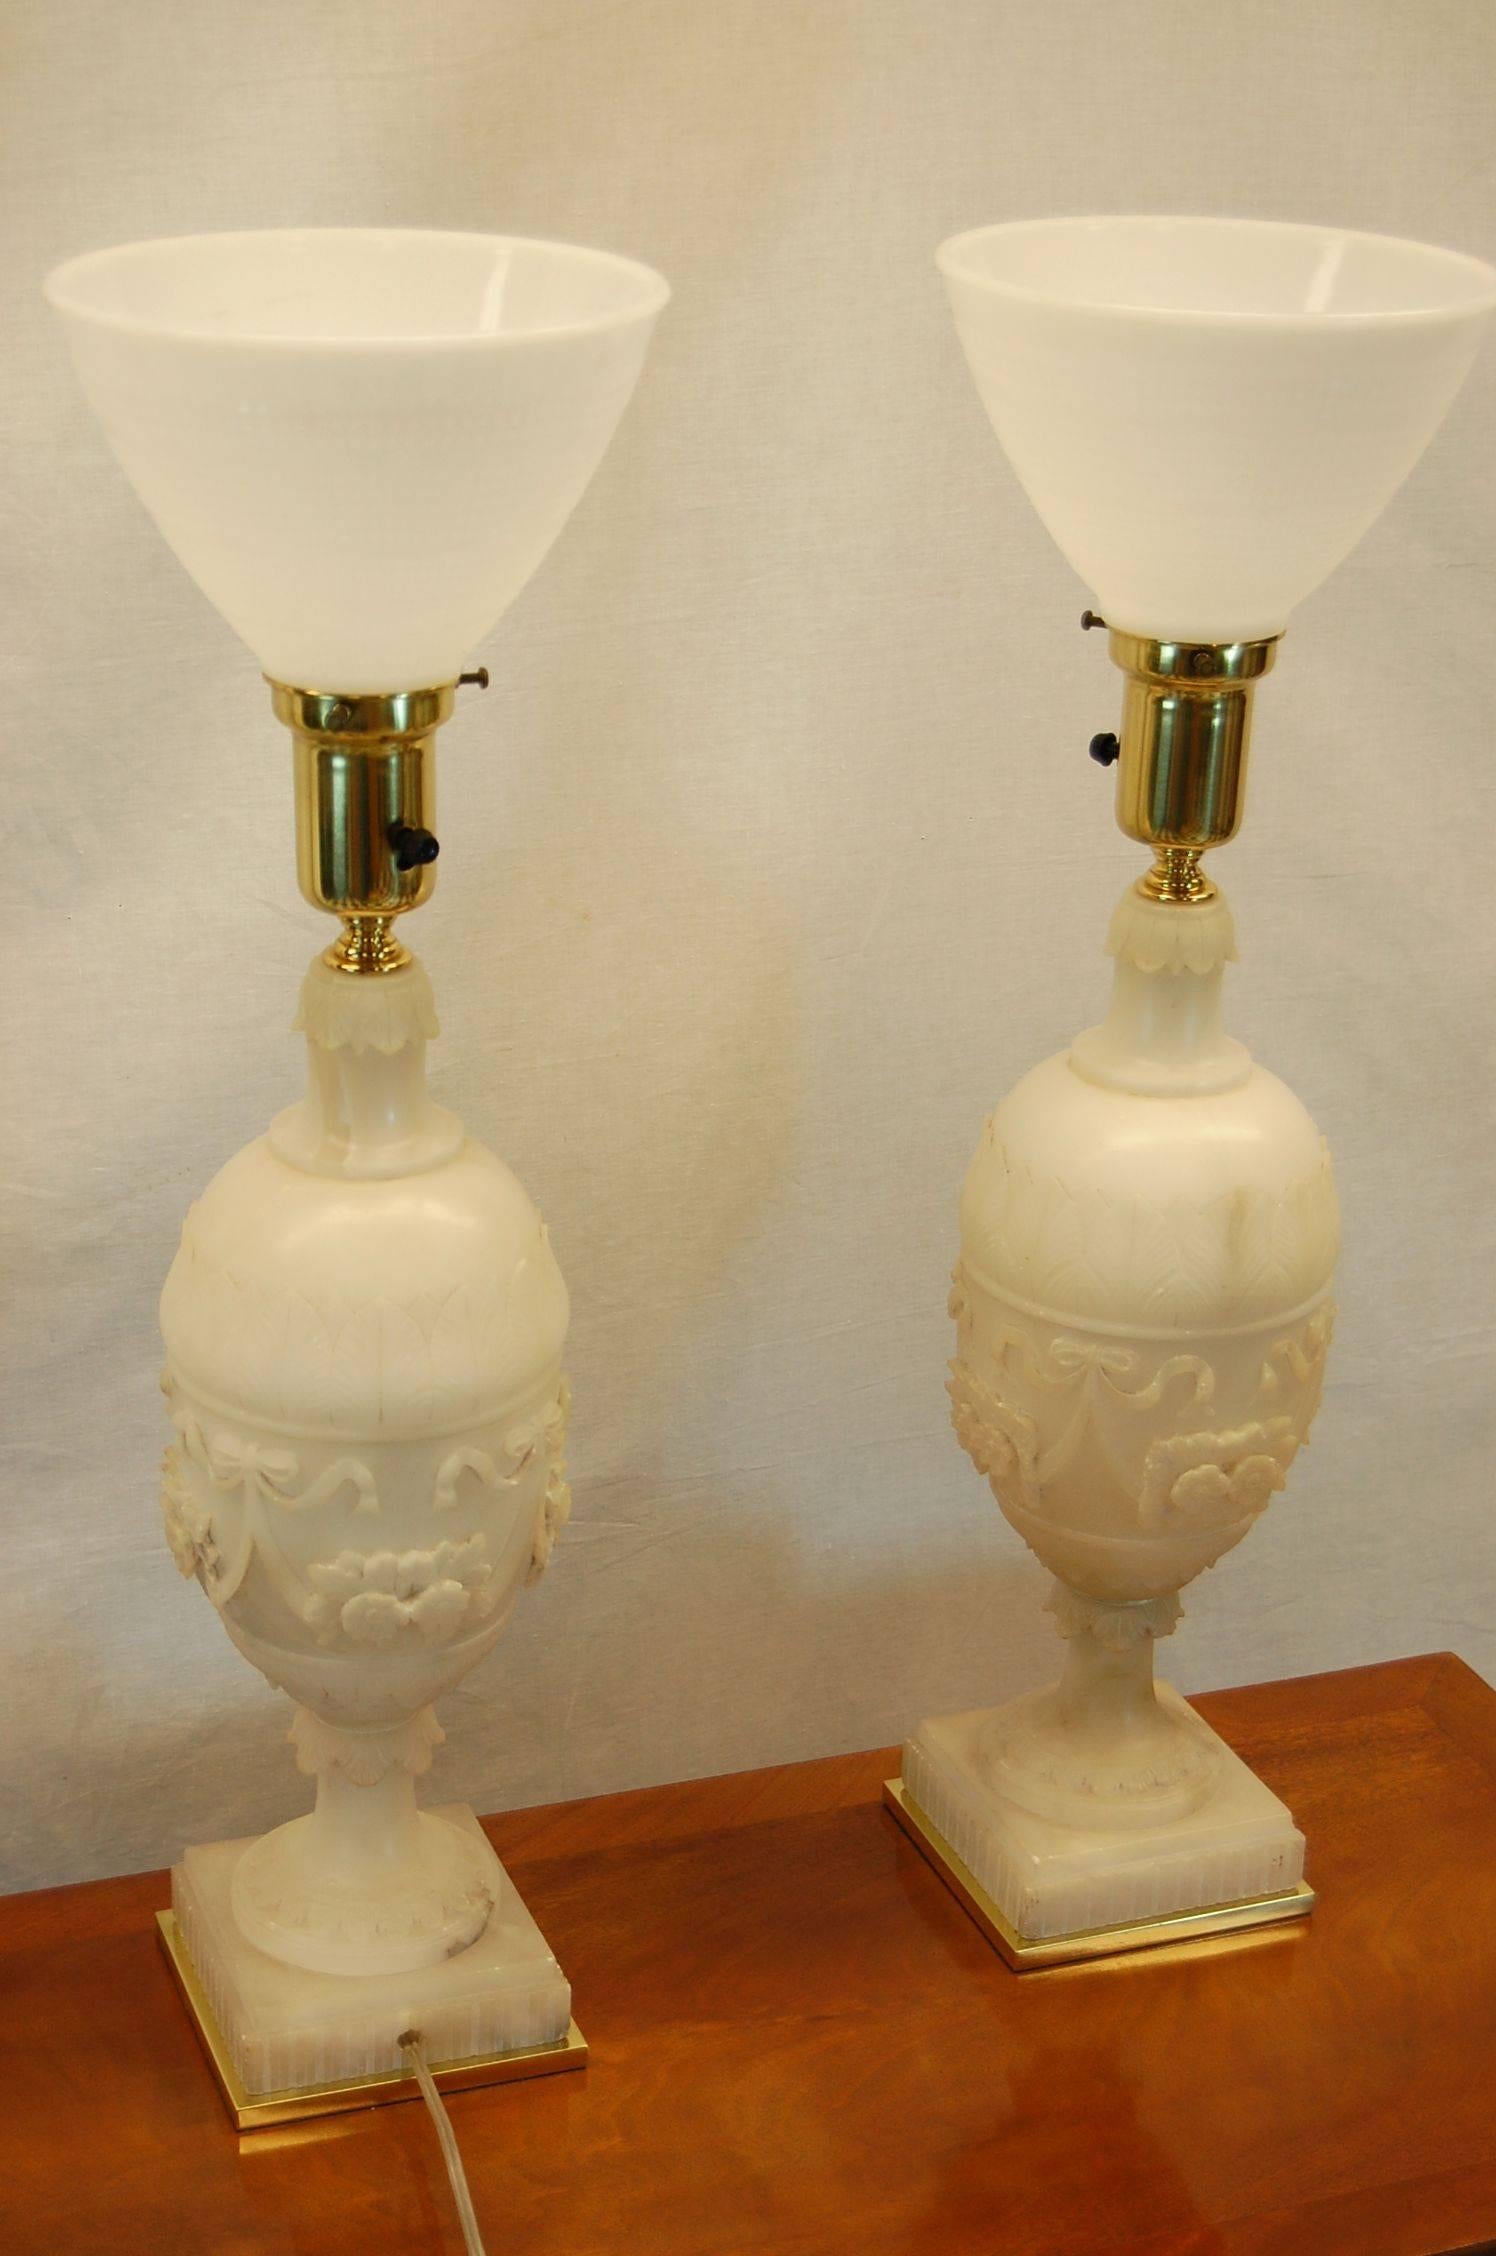 Pair of carved alabaster urn lamps in floral and swag motif, just rewired, cleaned and polished and in excellent condition. The alabaster urn itself measures 17